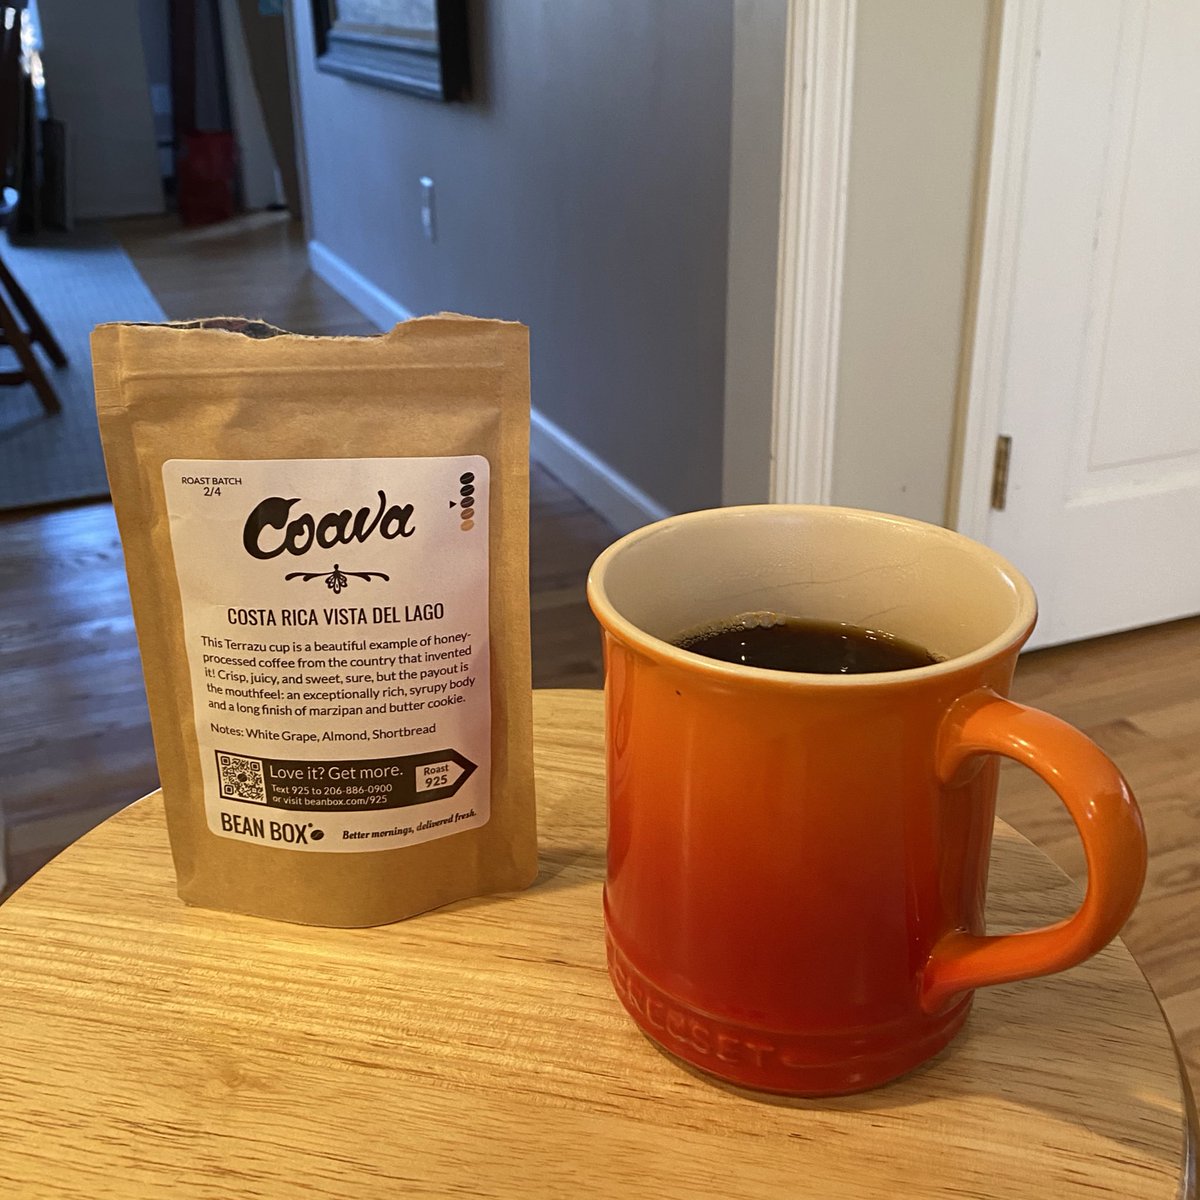 Coava Costa Rica Vista del LagoWhat a delight. I’ve had a few coffees from Coava and they never disappoint. This one is sweet and decadent, a really enjoyable cup!